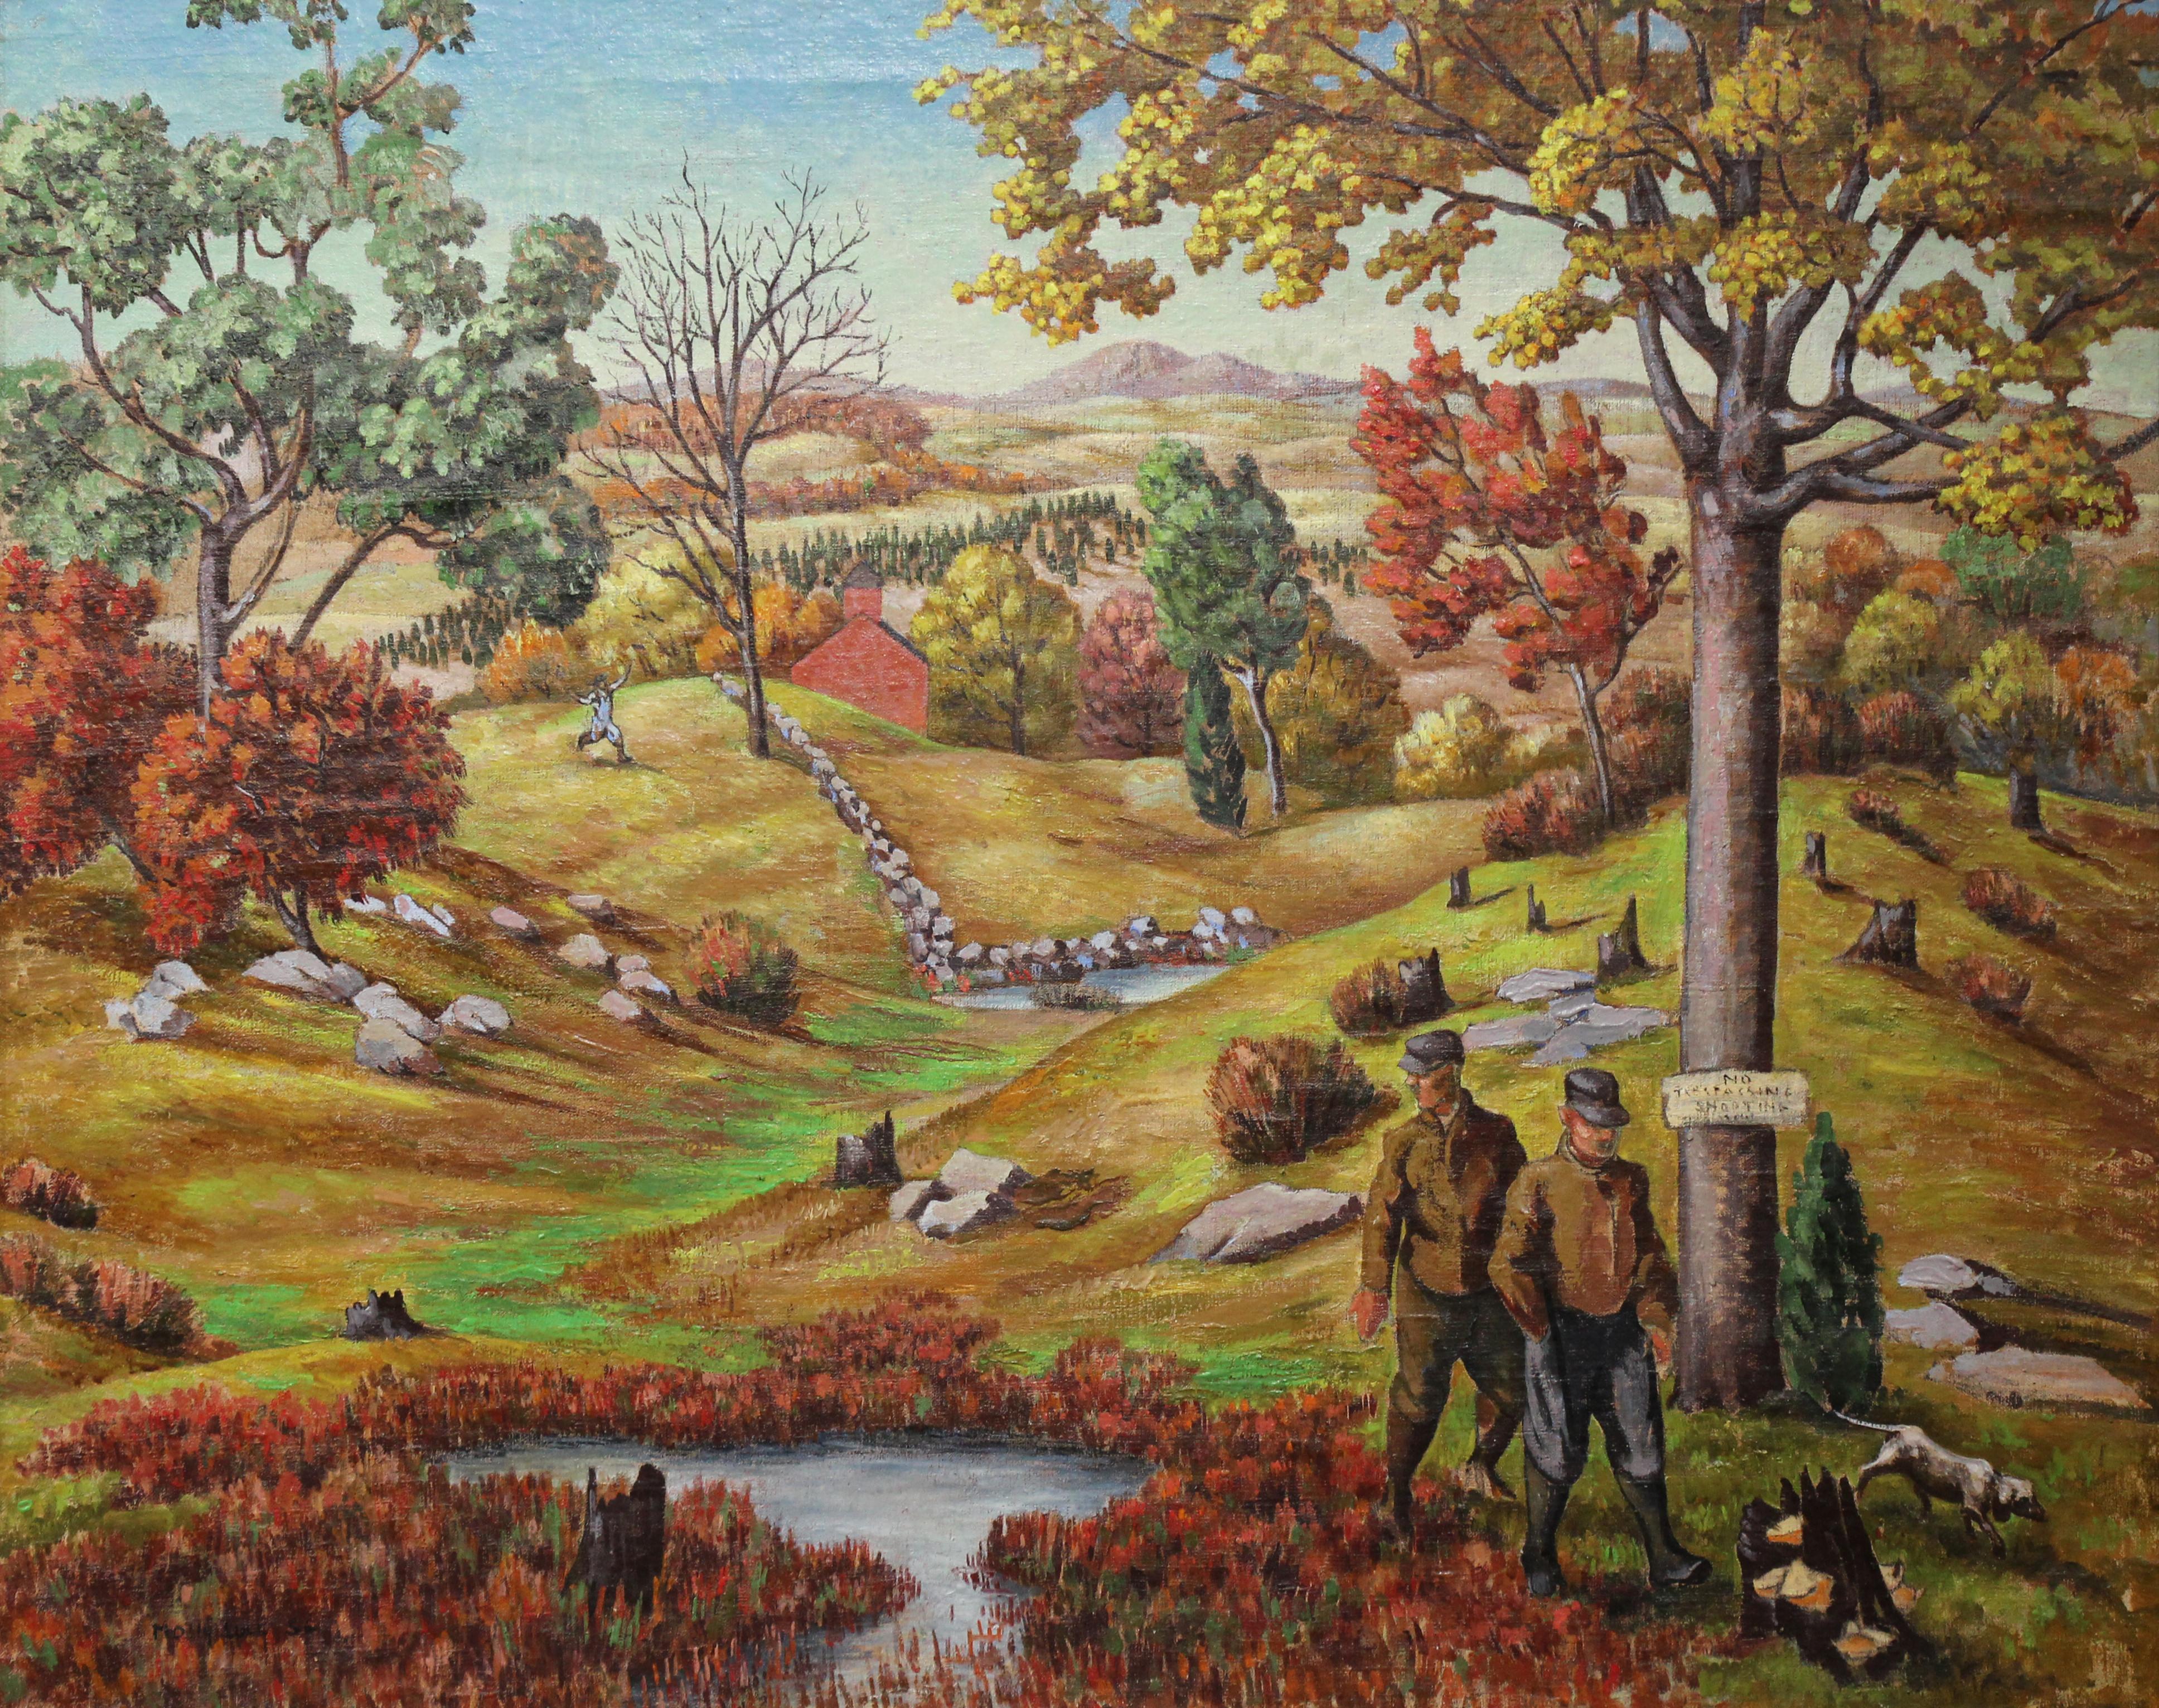 Molly Luce Landscape Painting - No Trespassing, Autumn Landscape and Hunters by Female American Realist Artist